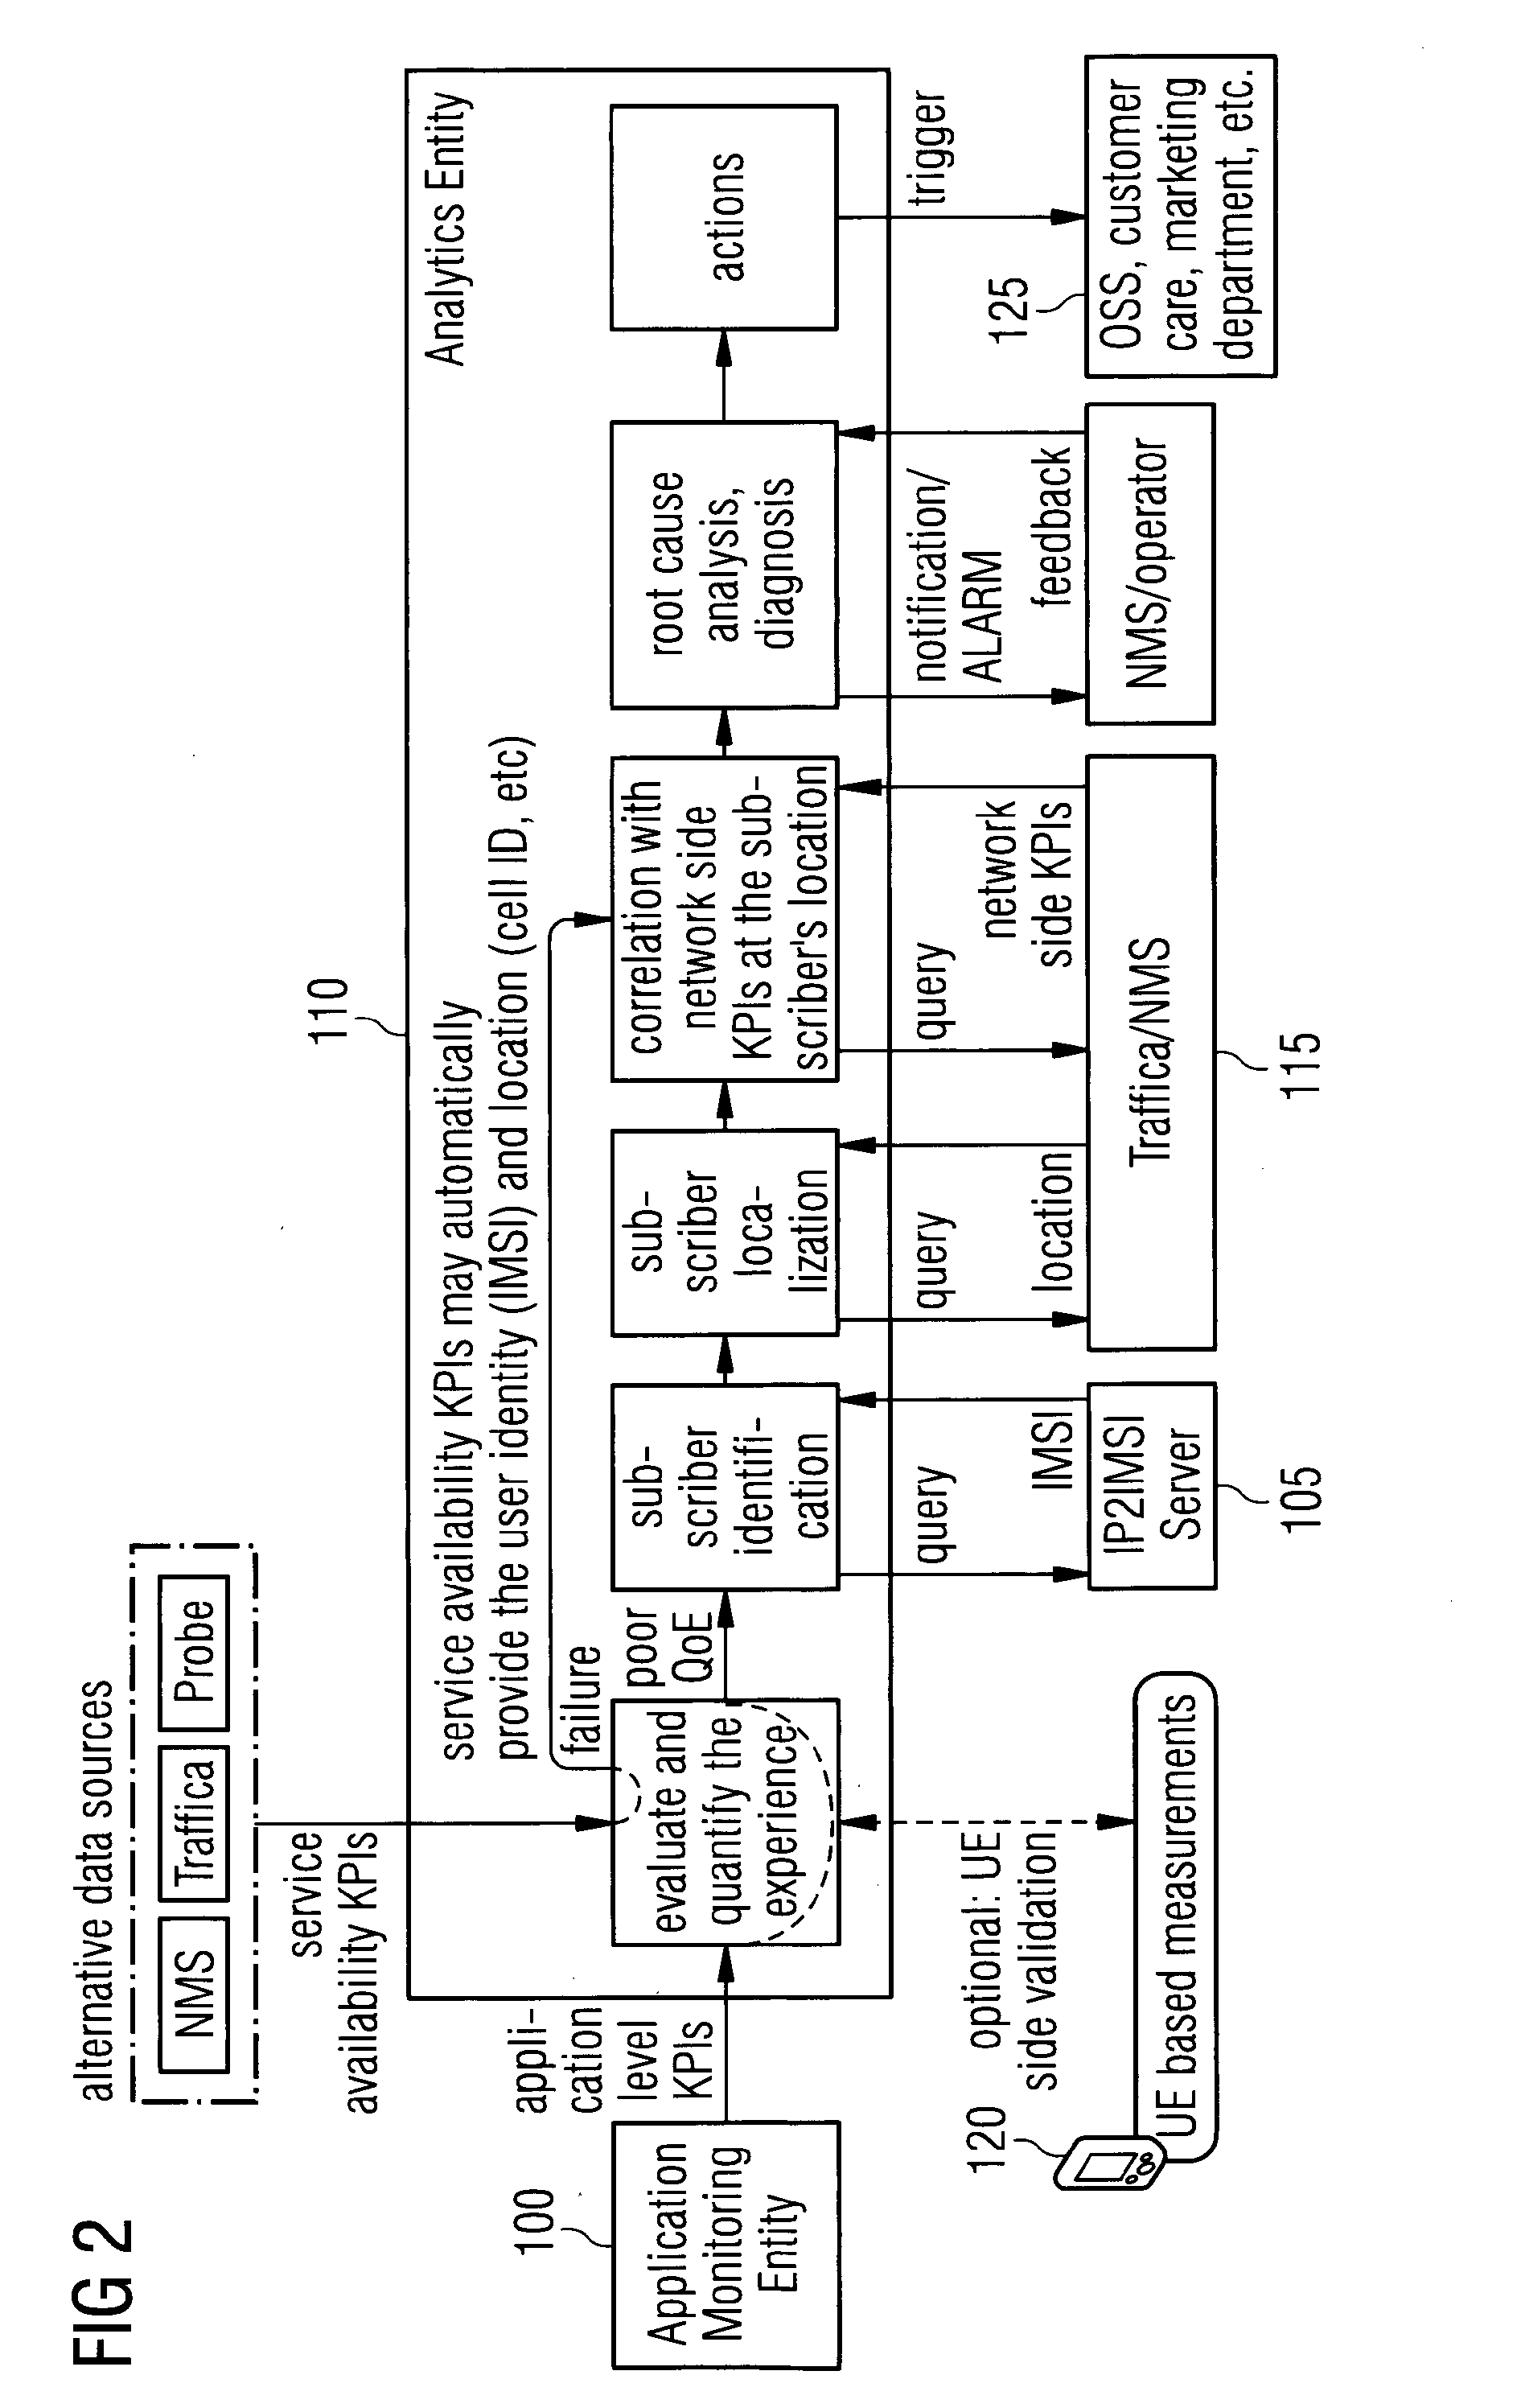 Method and apparatus for generating insight into the customer experience of web based applications